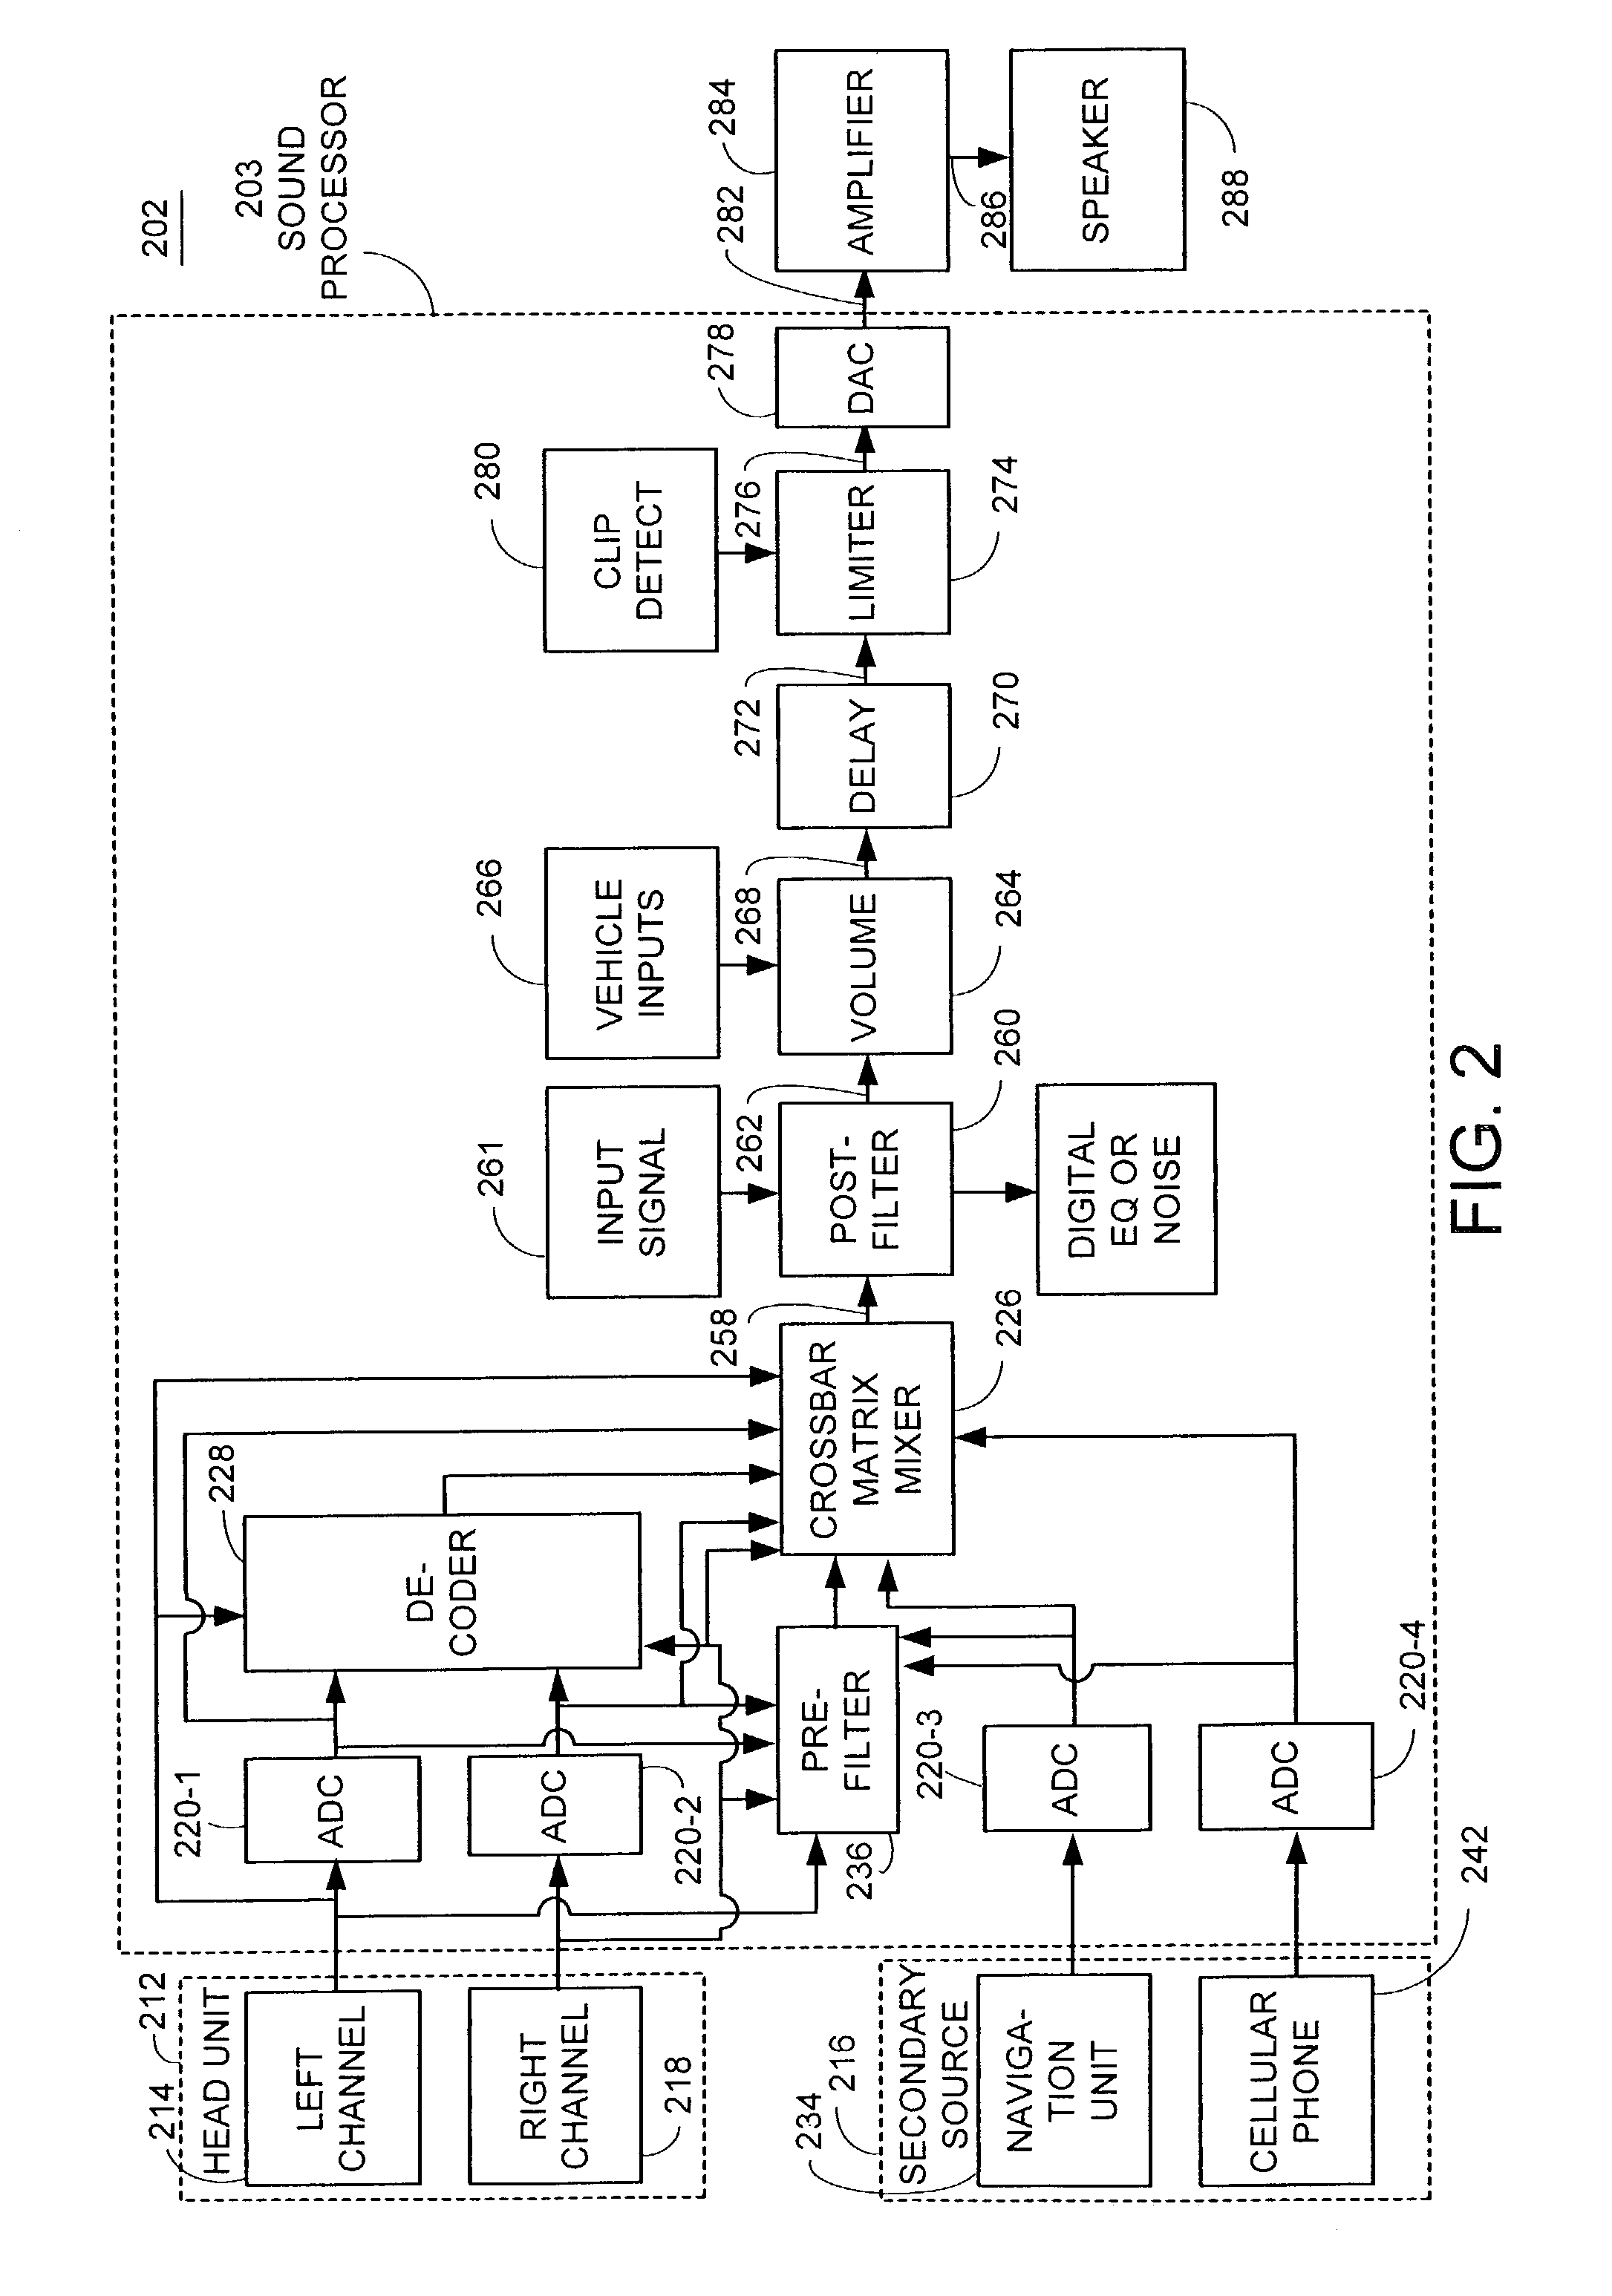 Sound processing system using spatial imaging techniques